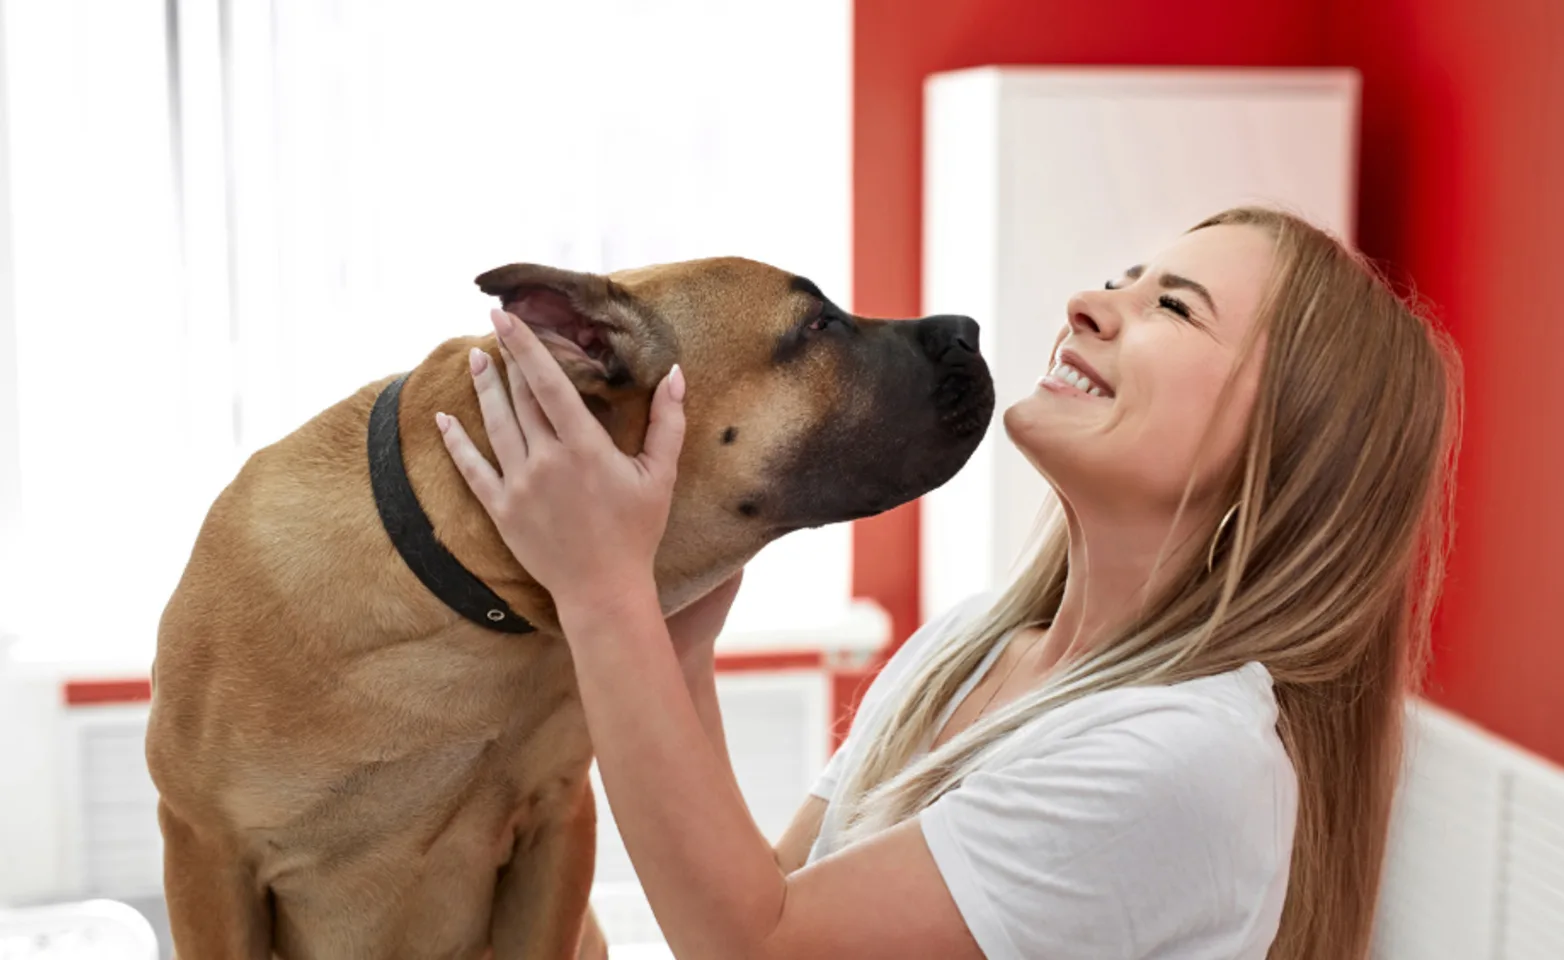 Girl Laughing and Holding a Brown Dog